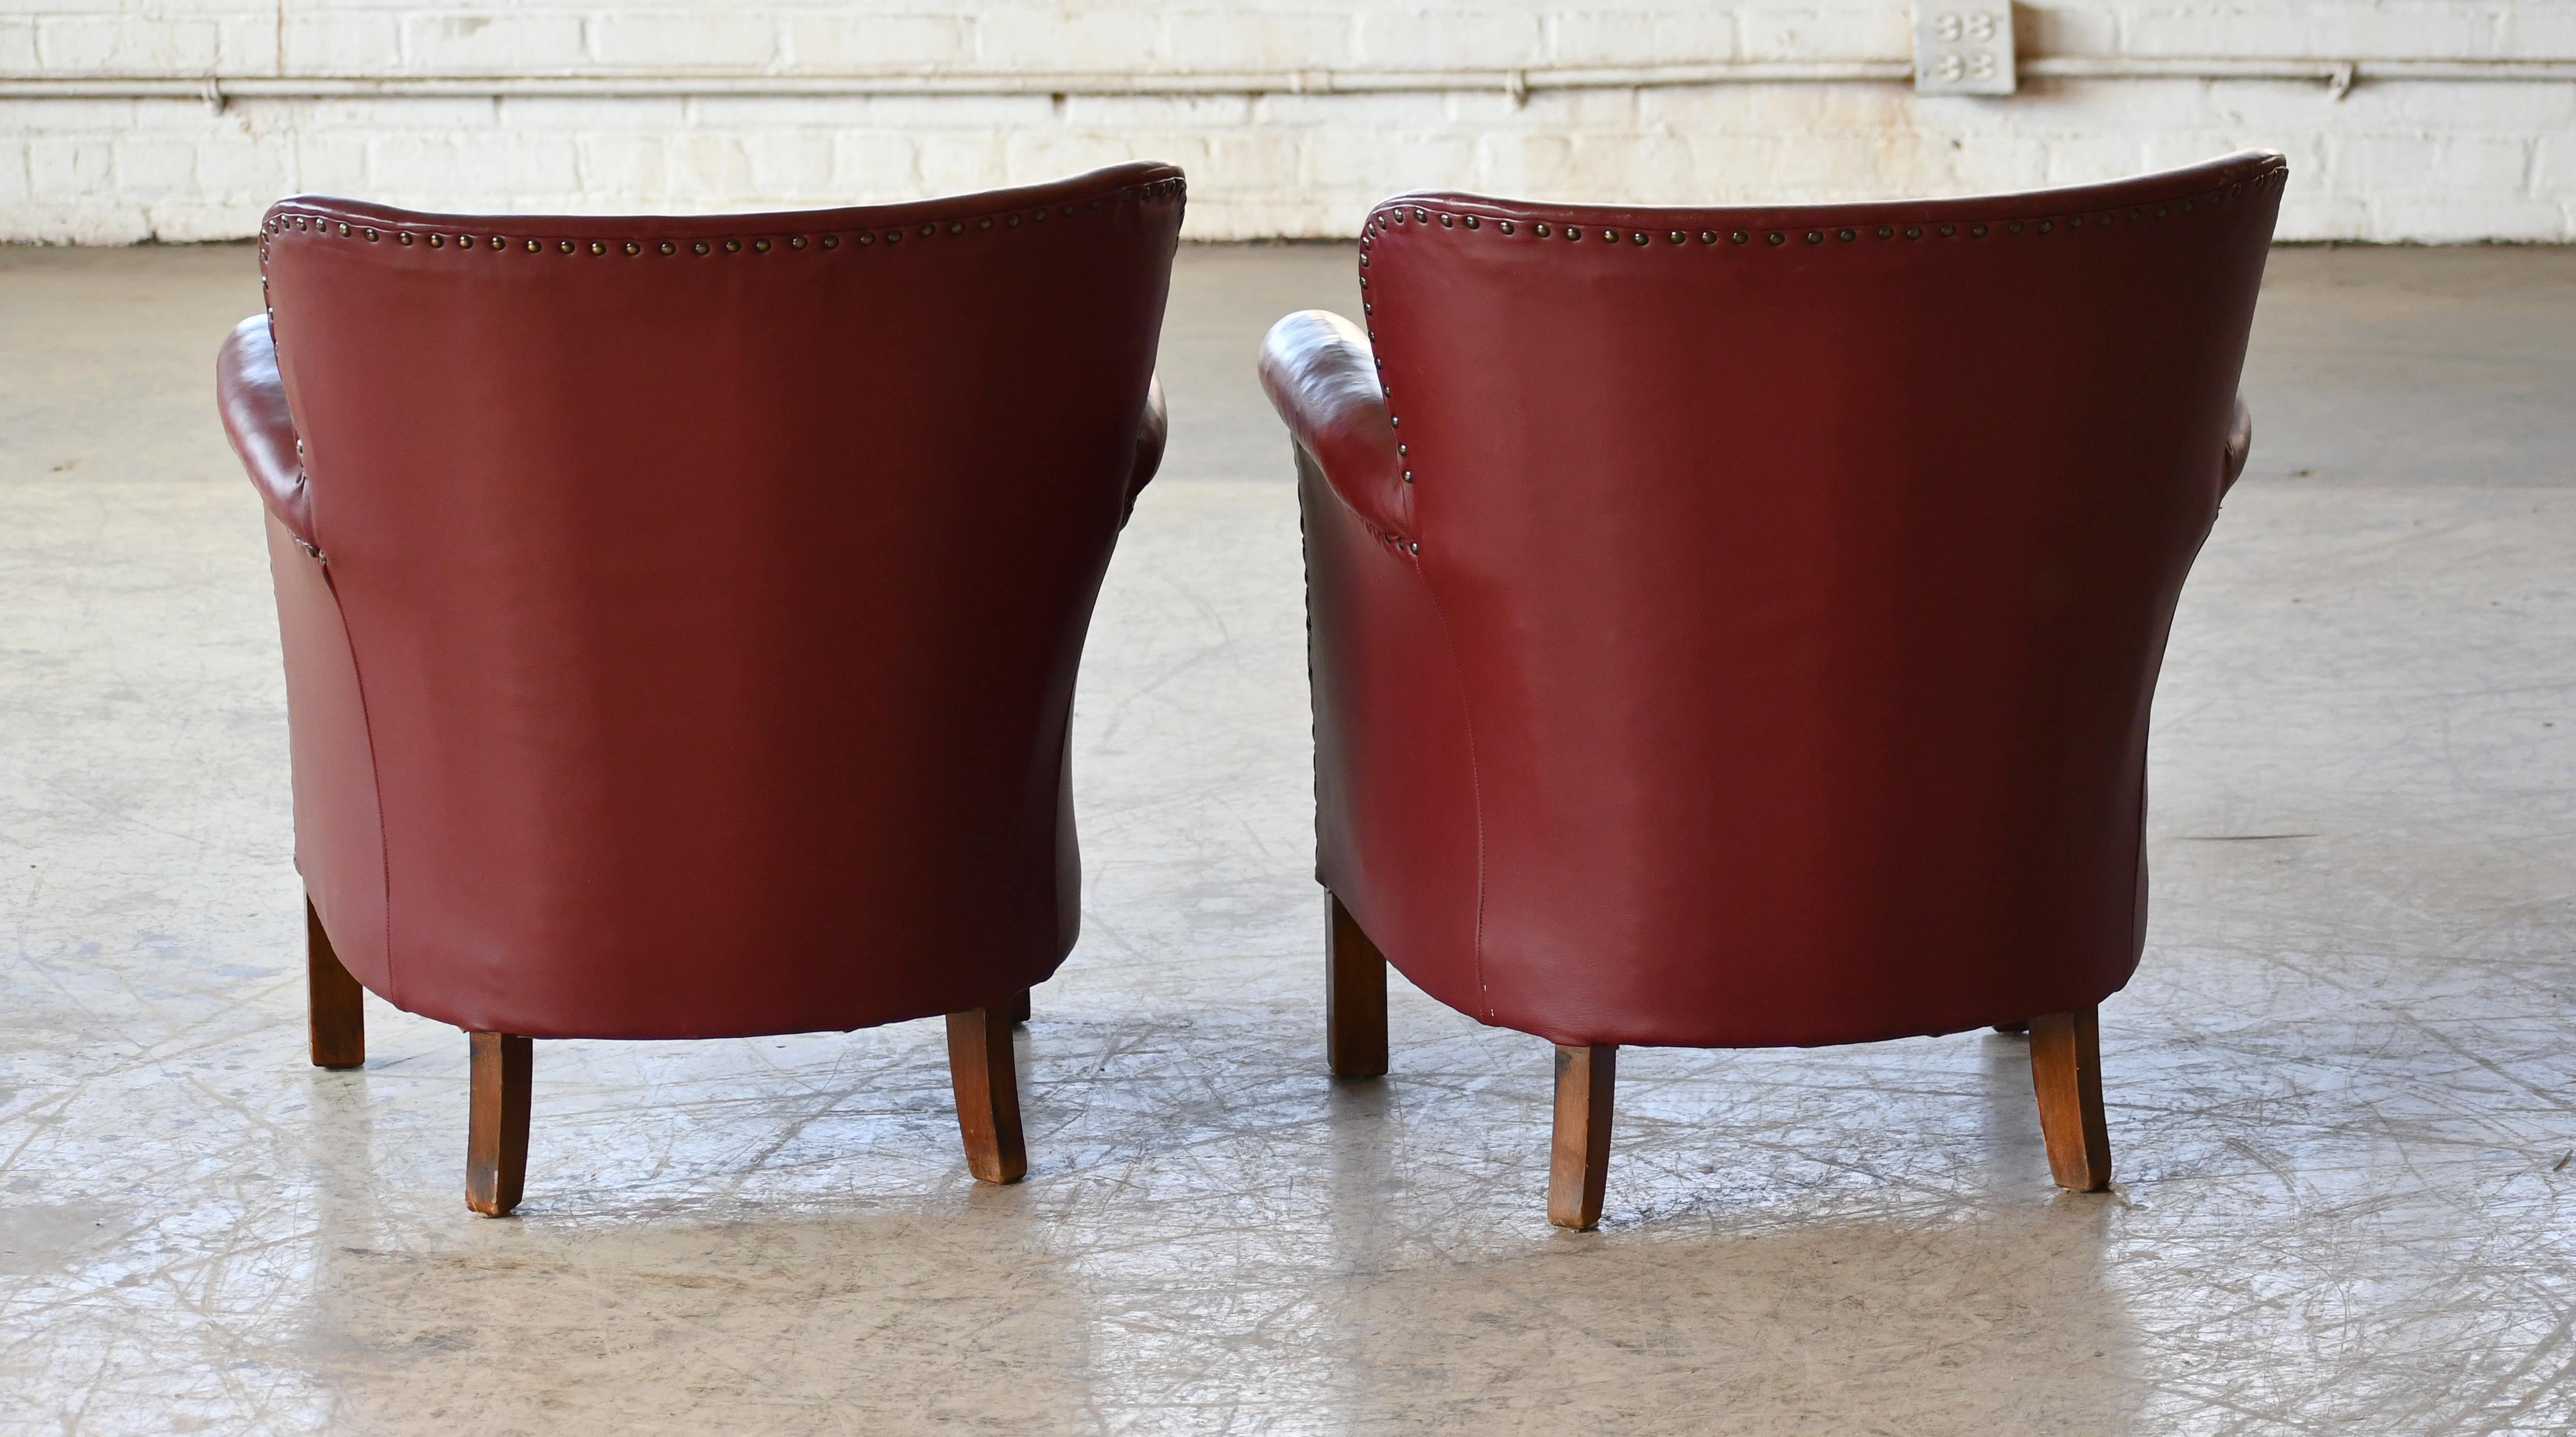 Mid-20th Century Pair of 1940s Danish Small Club or Library Chairs in Cordovan Colored Leather